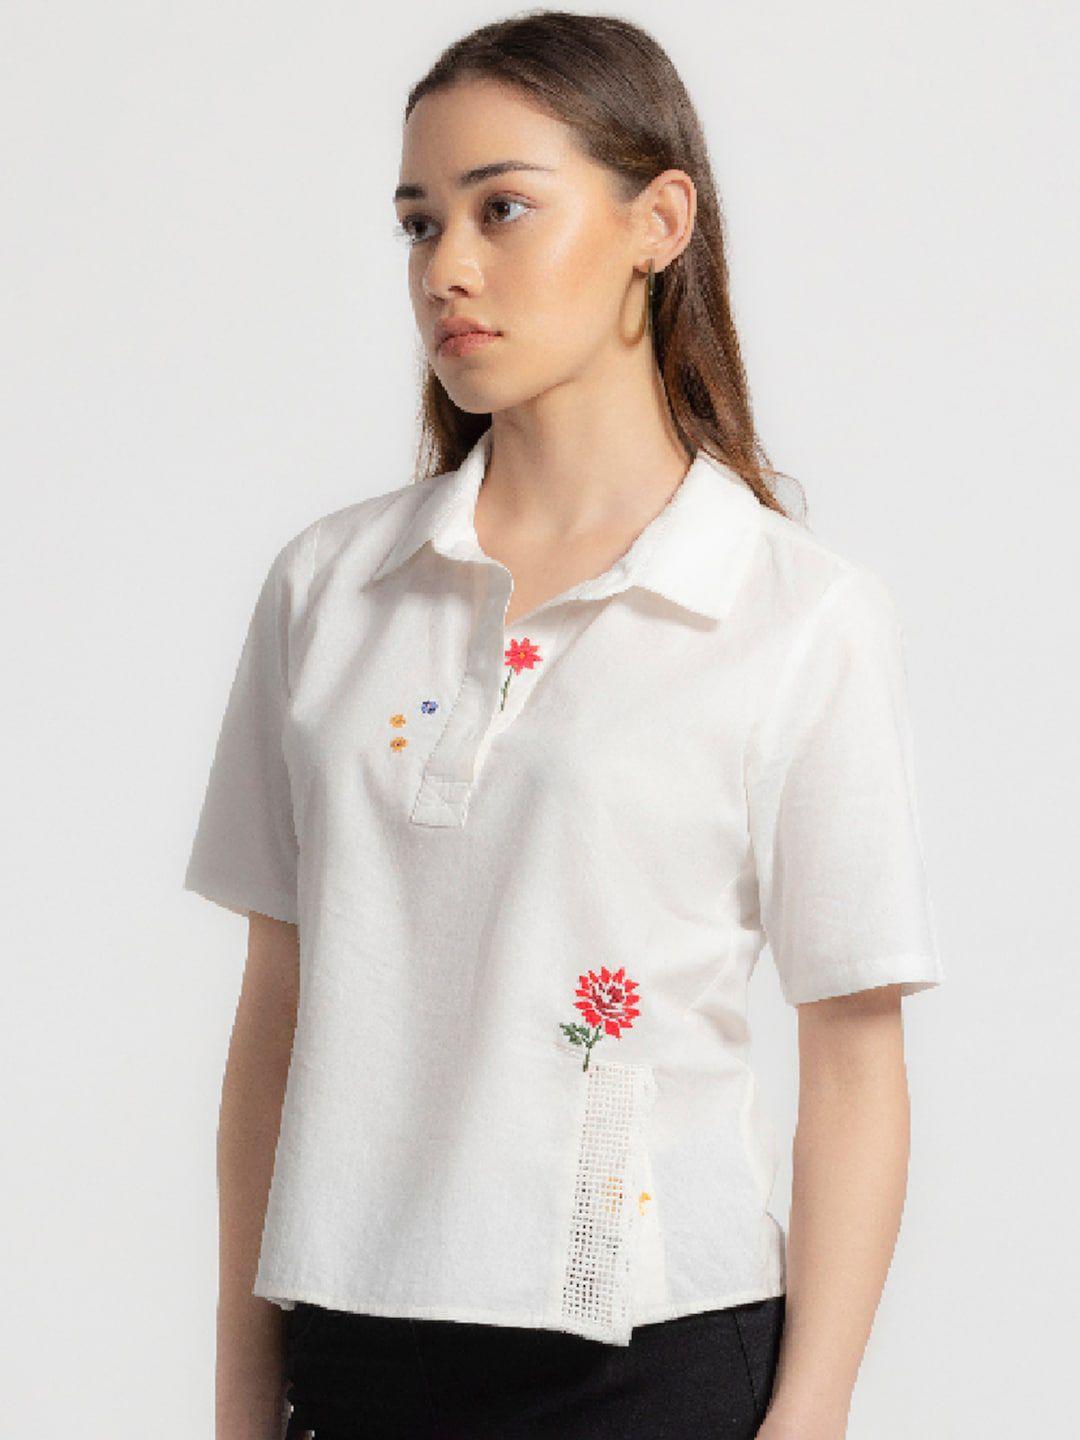 shaye shirt collar side slit floral embroidered cotton top